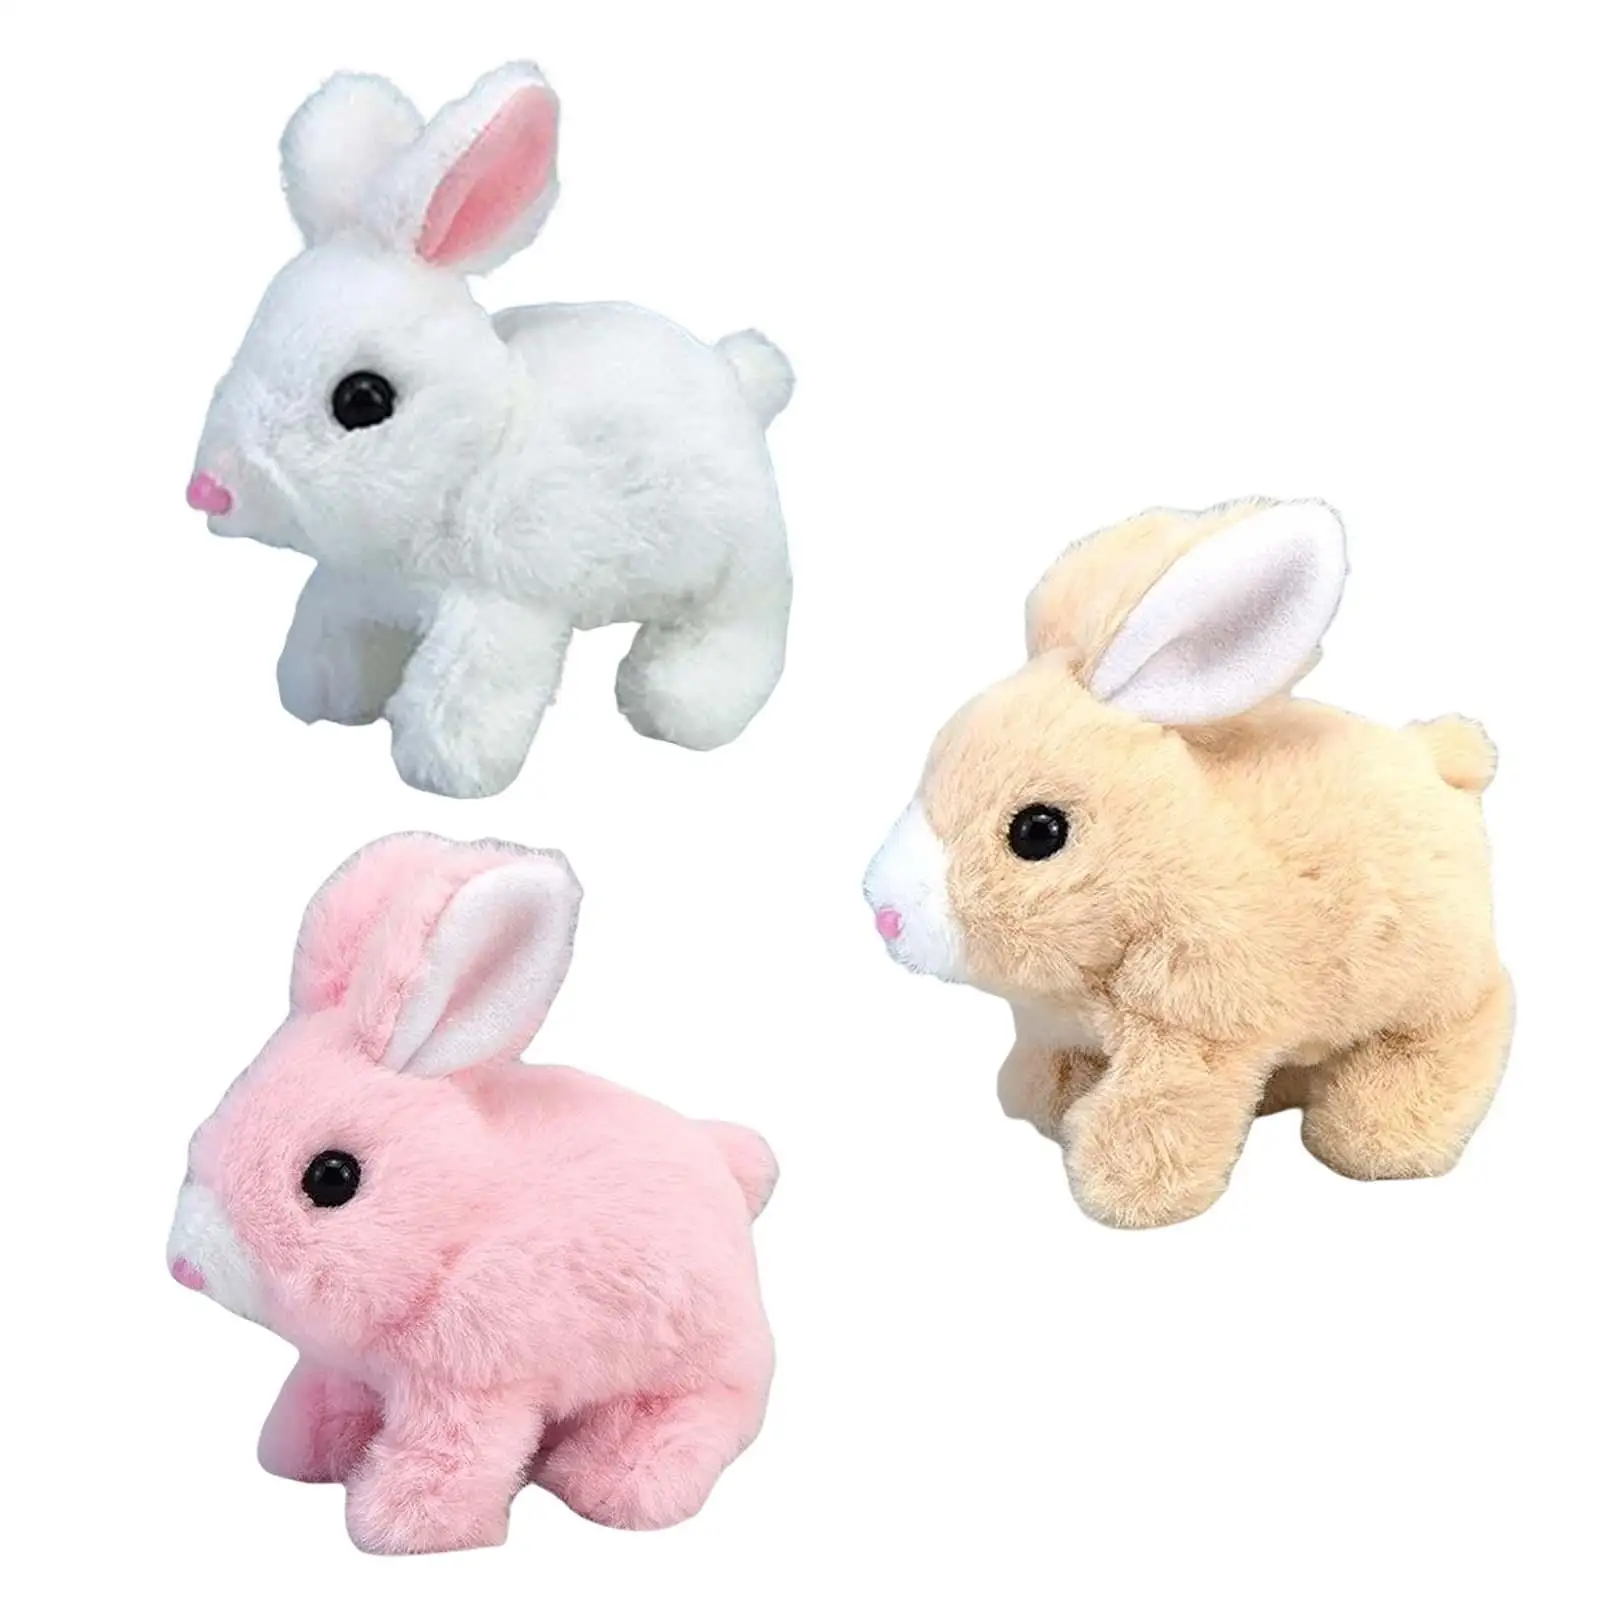 Battery Operated Electric Bunny Plush Toy Stuffed Animals for Kids Toy